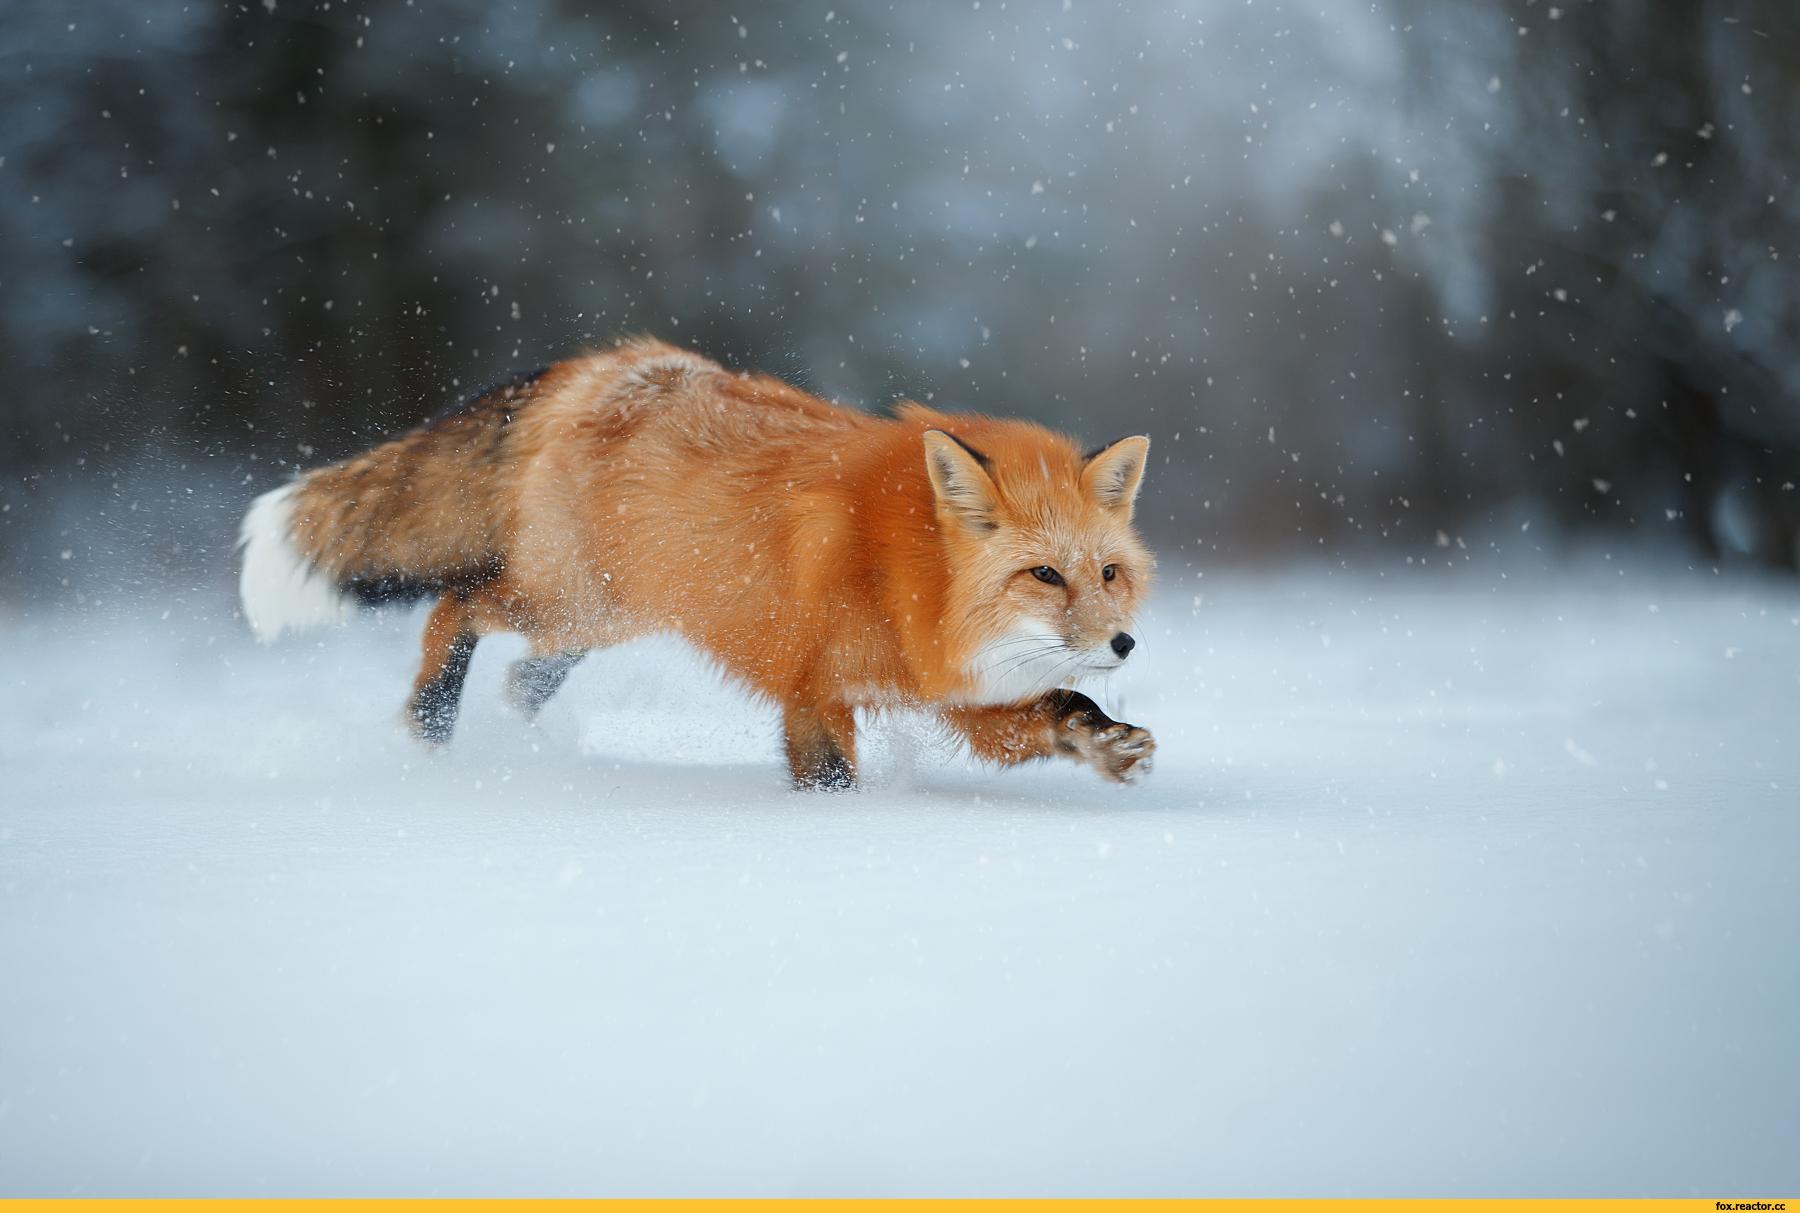 All about FOXes and MOUSE in winter | Film Studio Aves - YouTube